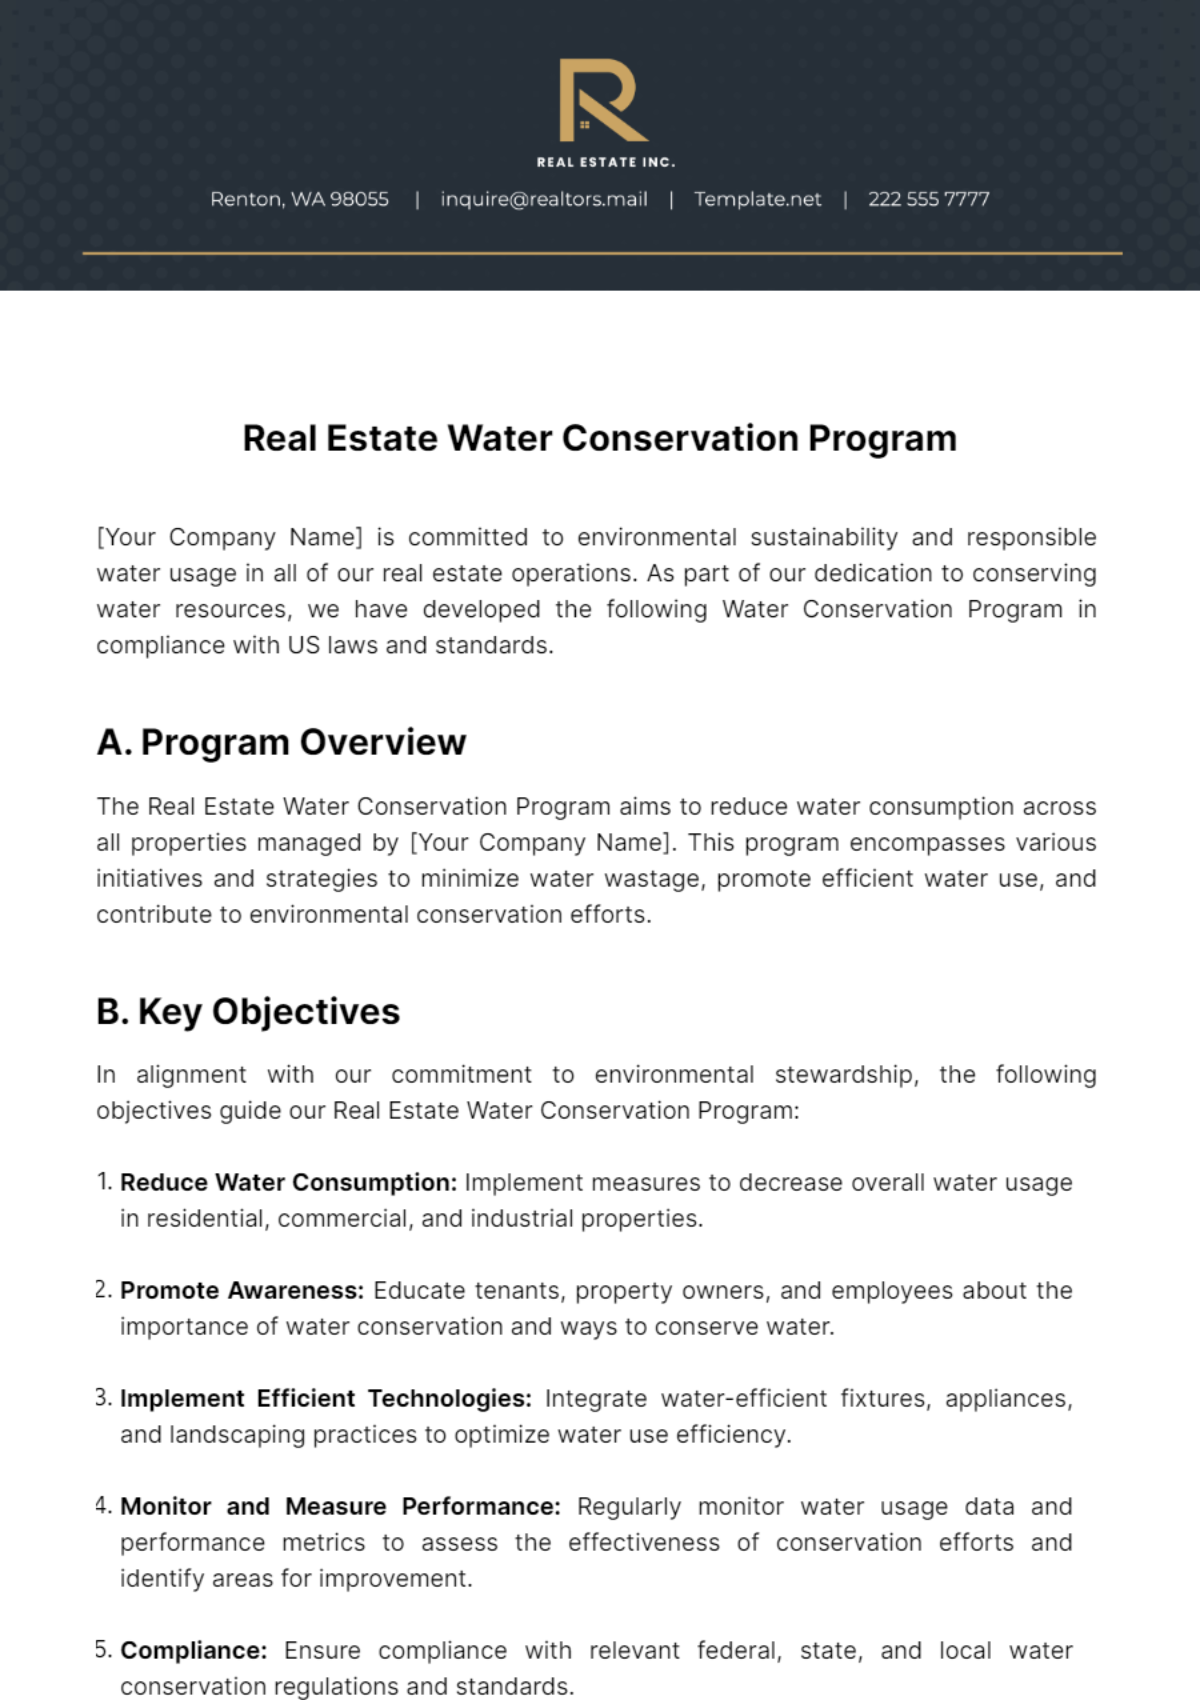 Real Estate Water Conservation Program Template